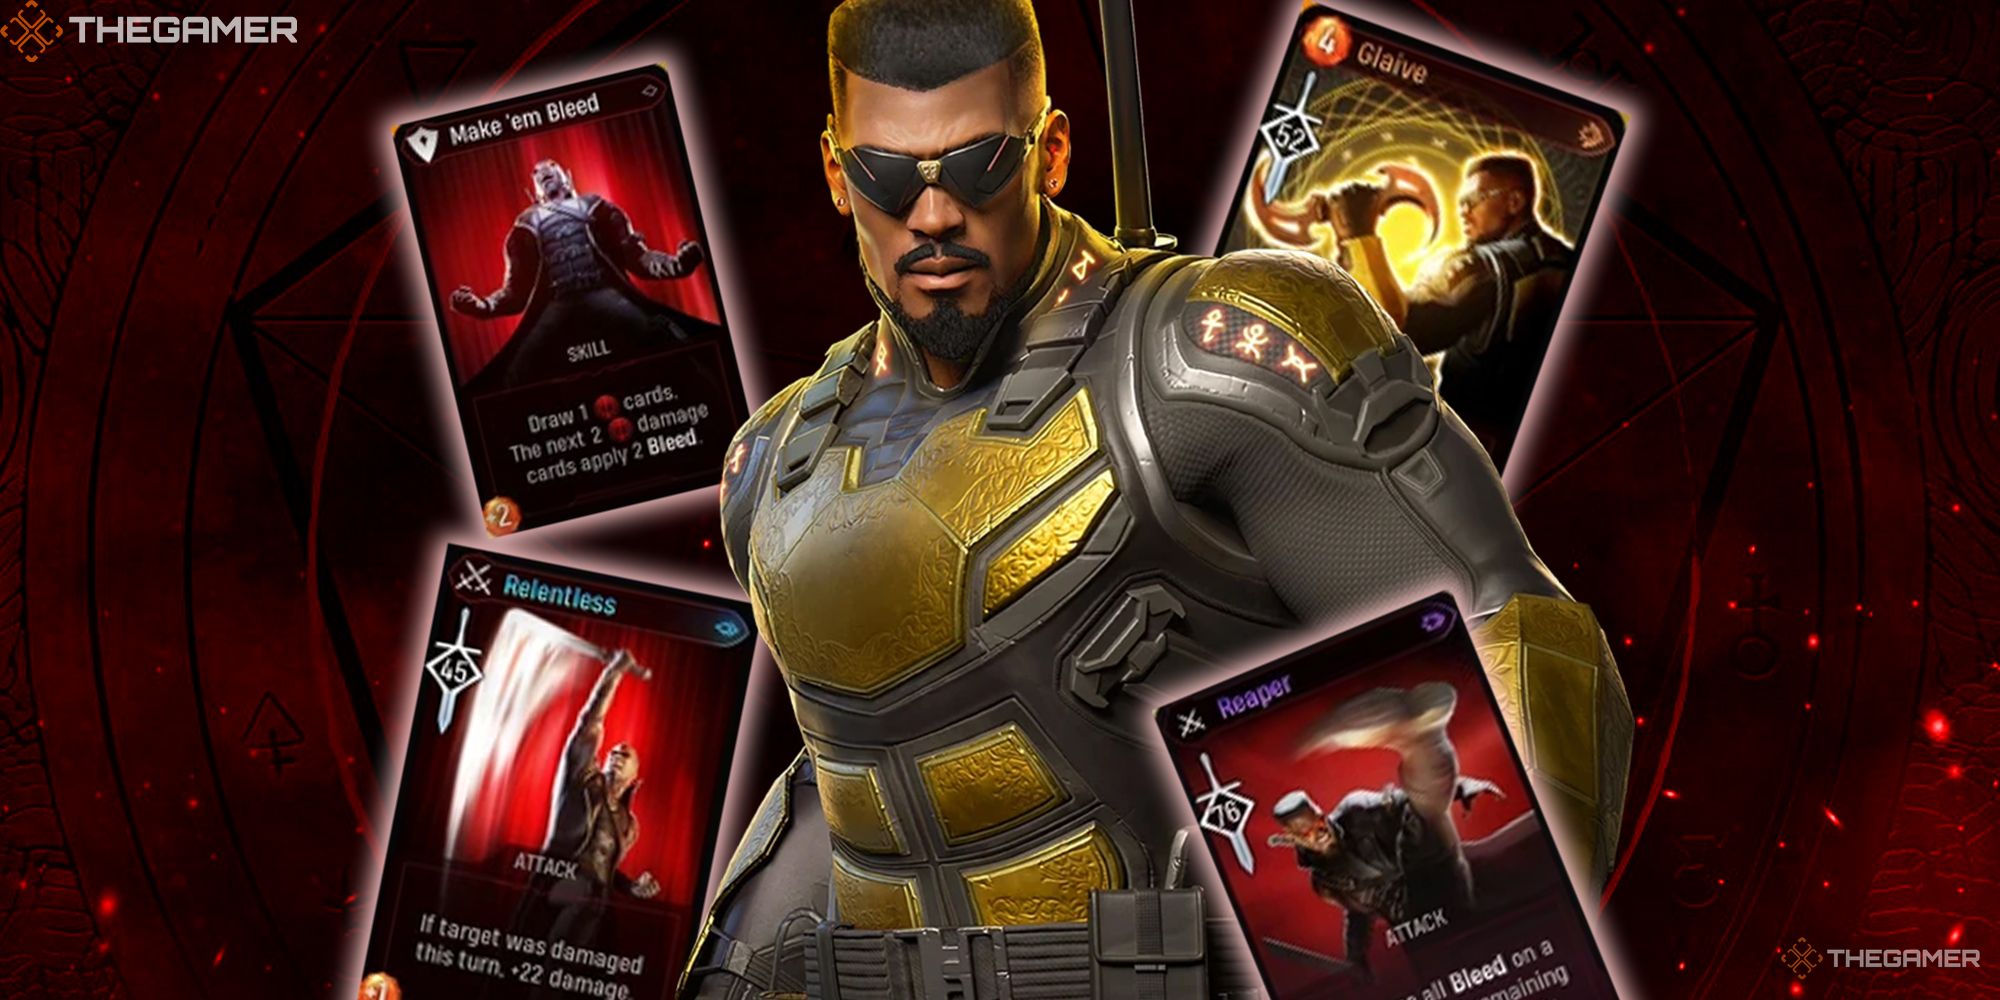 Blade, in his Midnight Suns uniform, stands against a mystical red background surrounded by glowing cards.